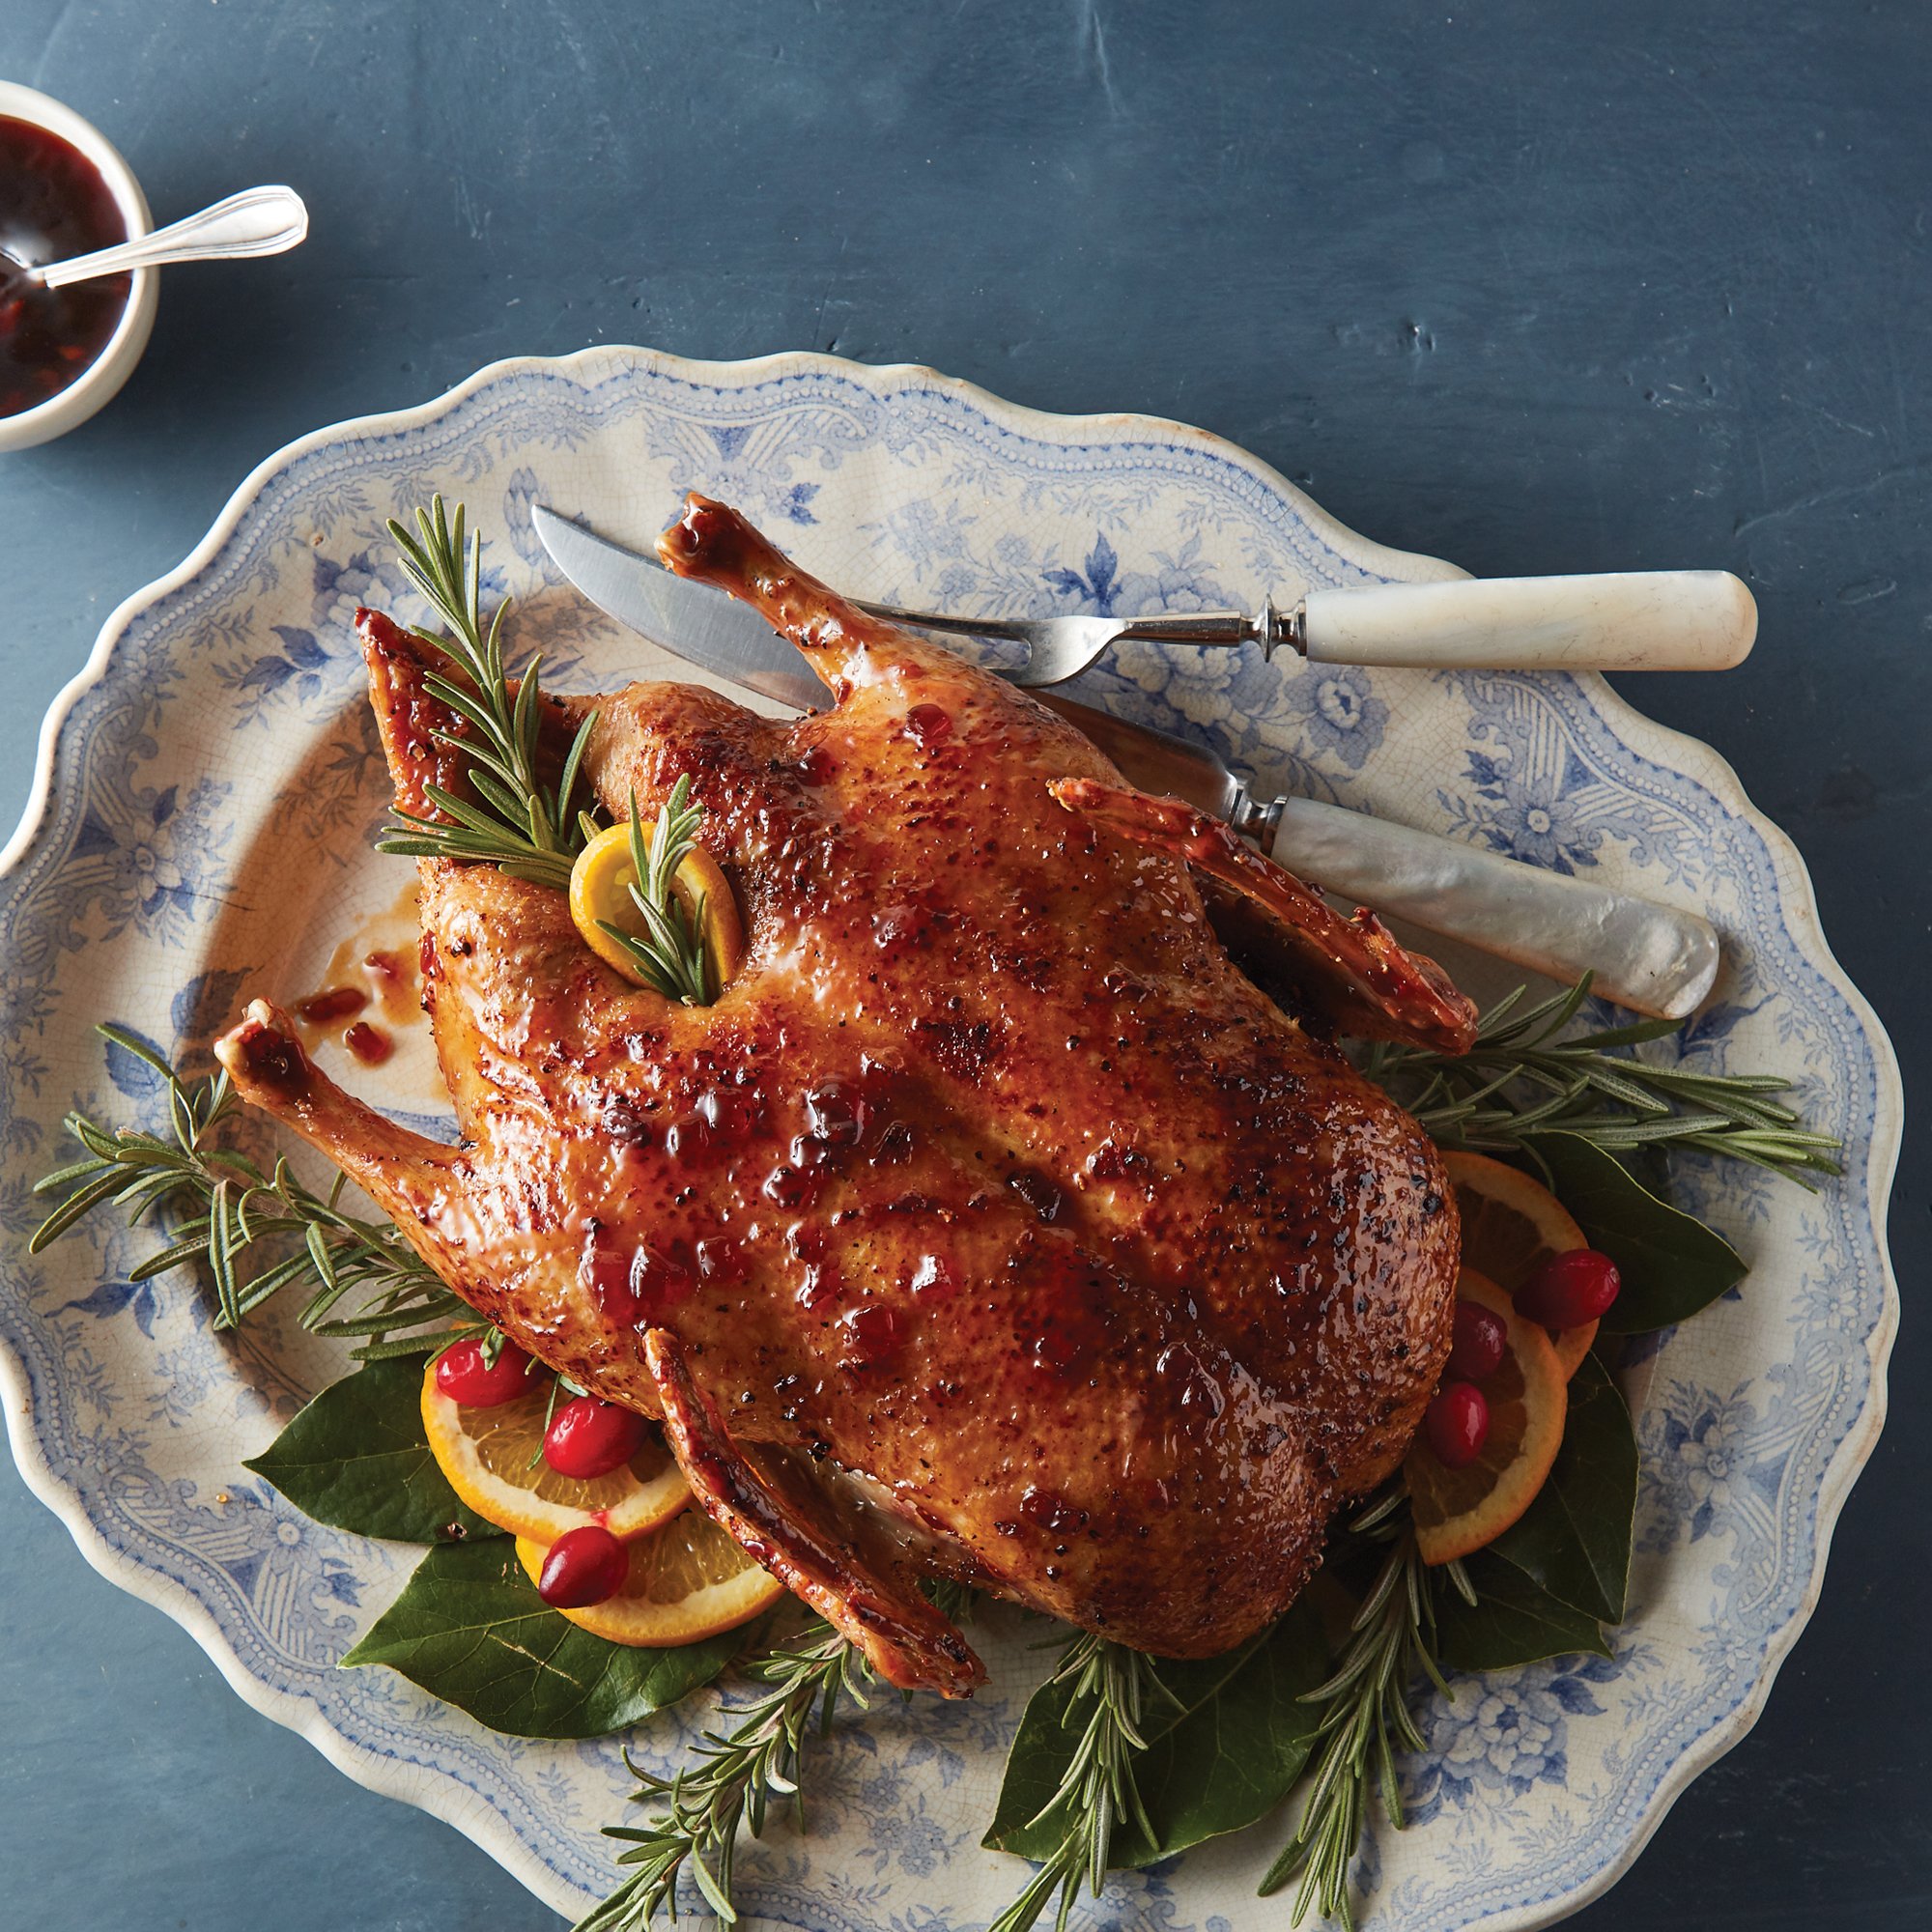 https://images.heb.com/is/image/HEBGrocery/recipe-hm-large/roasted-duck-with-whiskey-glaze-recipe.jpg